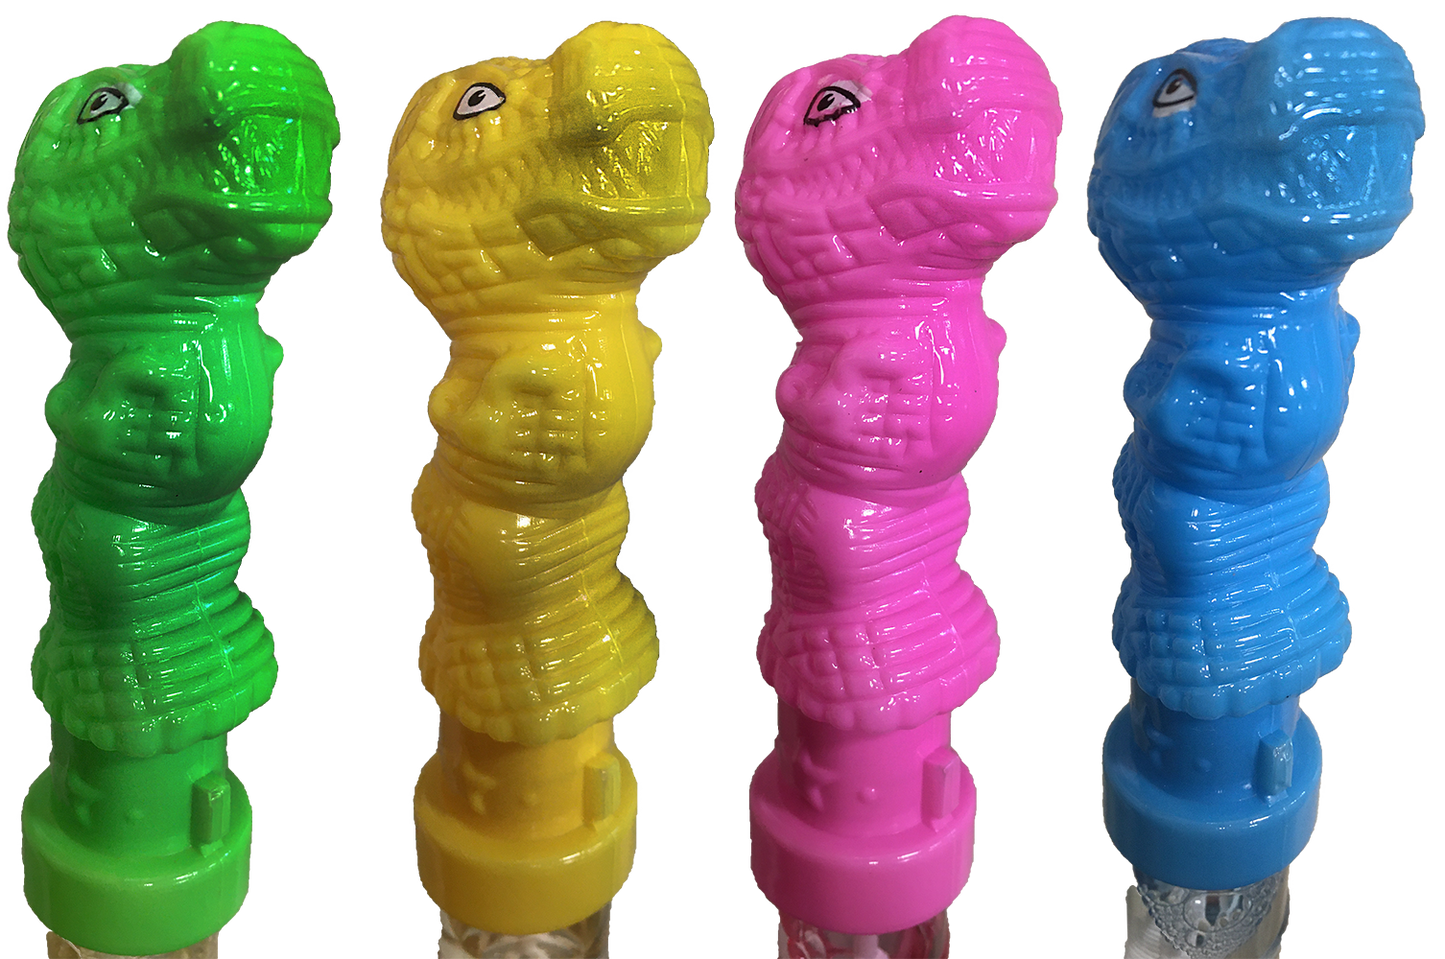 Dinosaur Bubble Wand Display, x24 wands in 4 colors